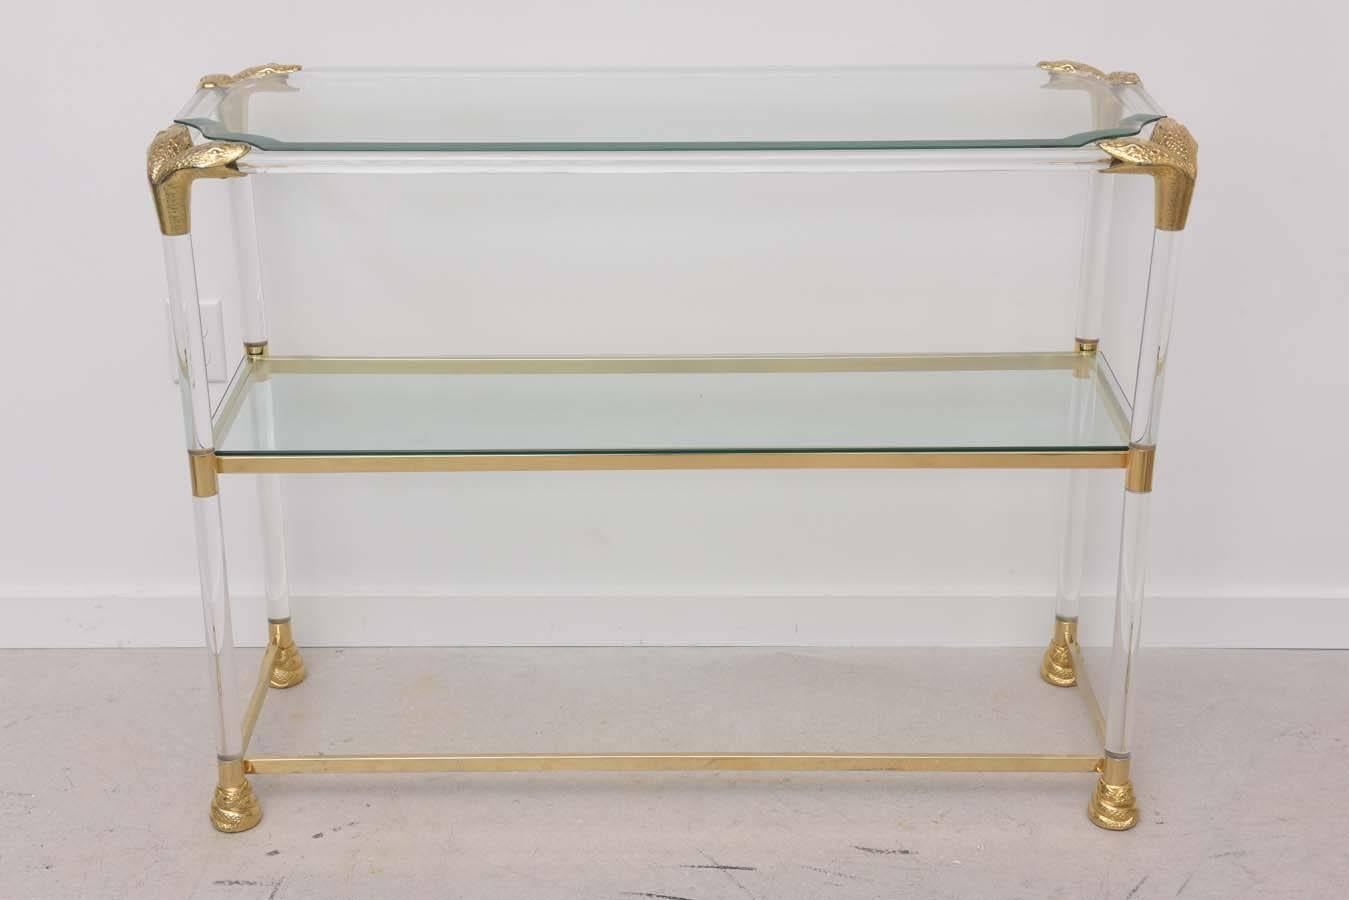 Rectangular three-tiered console table or shelf with Lucite body glass shelves and brass python heads at corners.